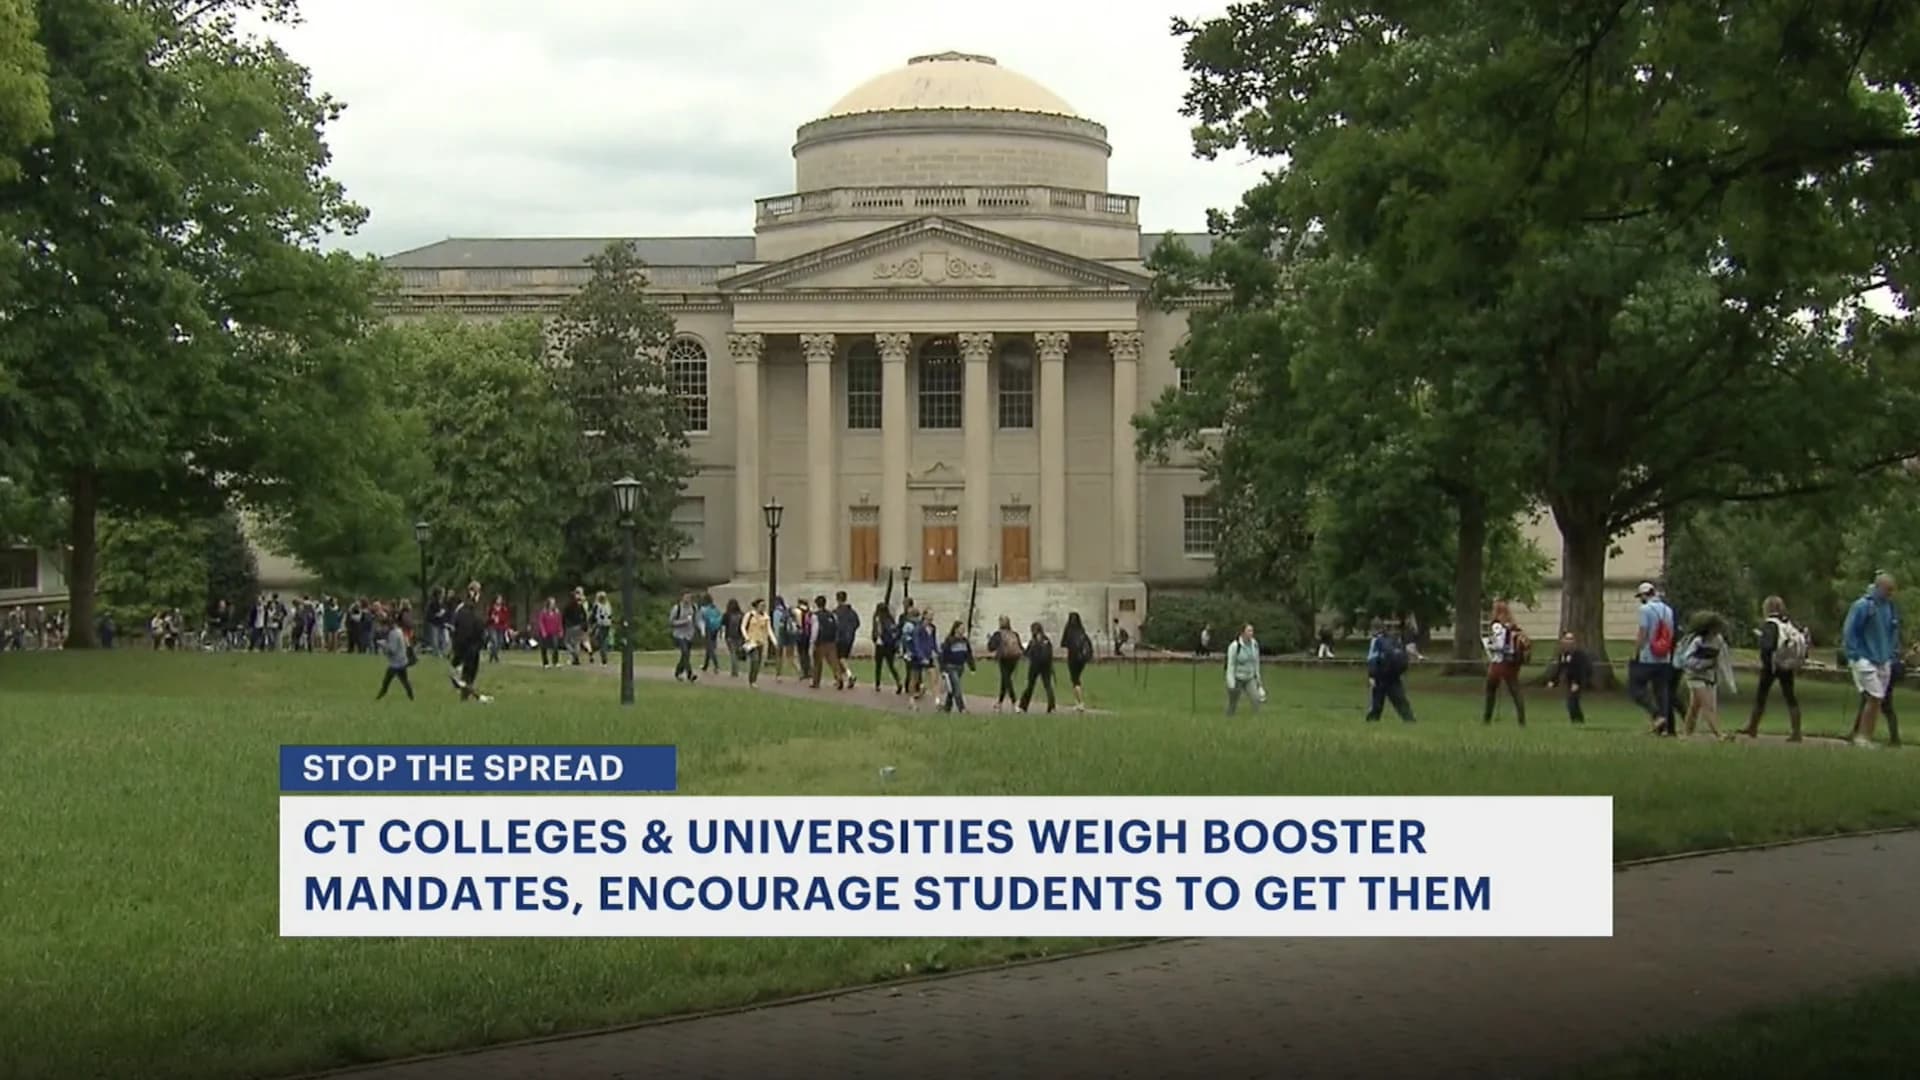 Connecticut colleges looking into requiring boosters for students but not mandating yet